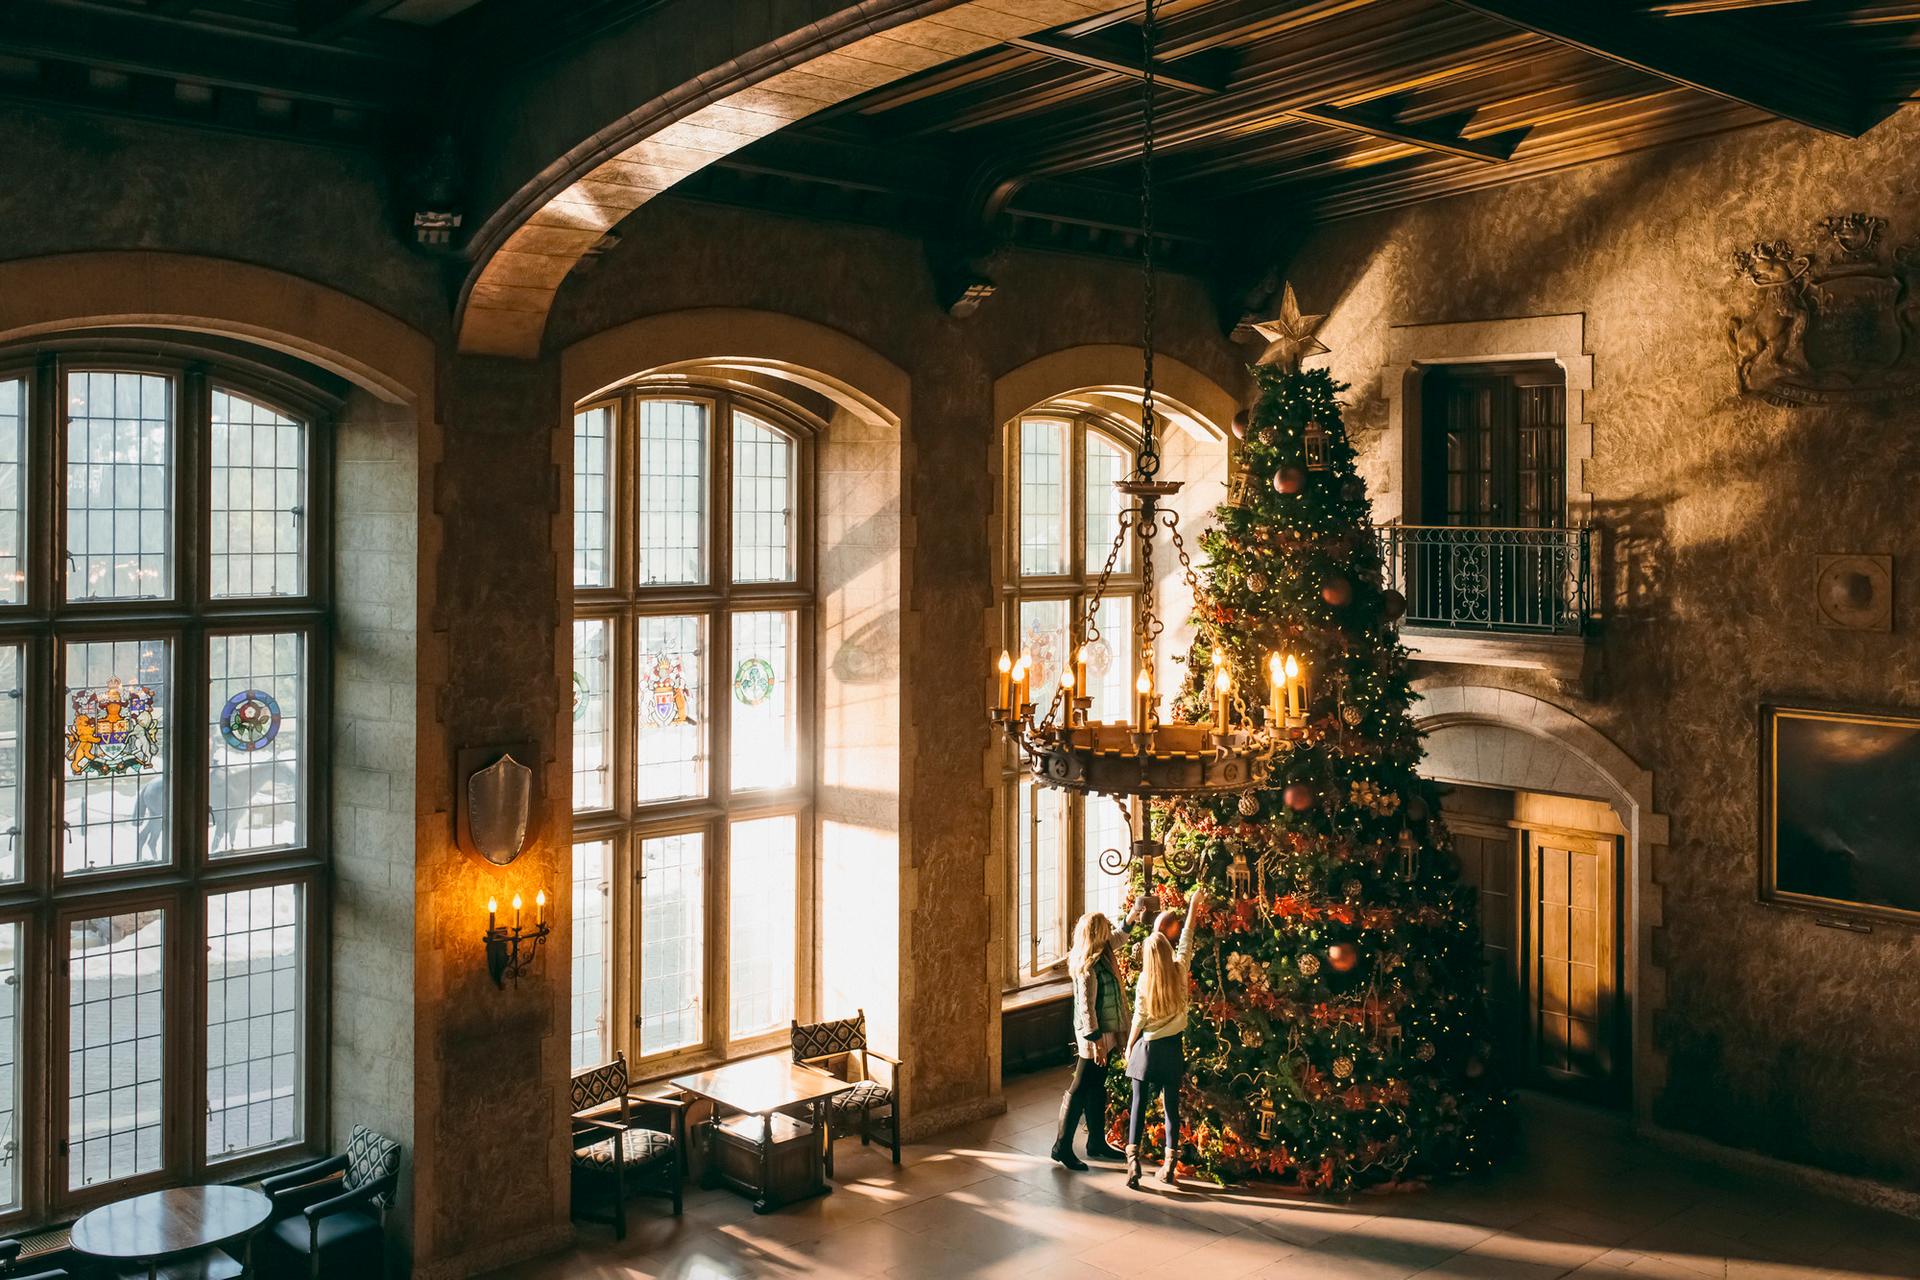 Christmas at the Fairmont Banff Springs Hotel